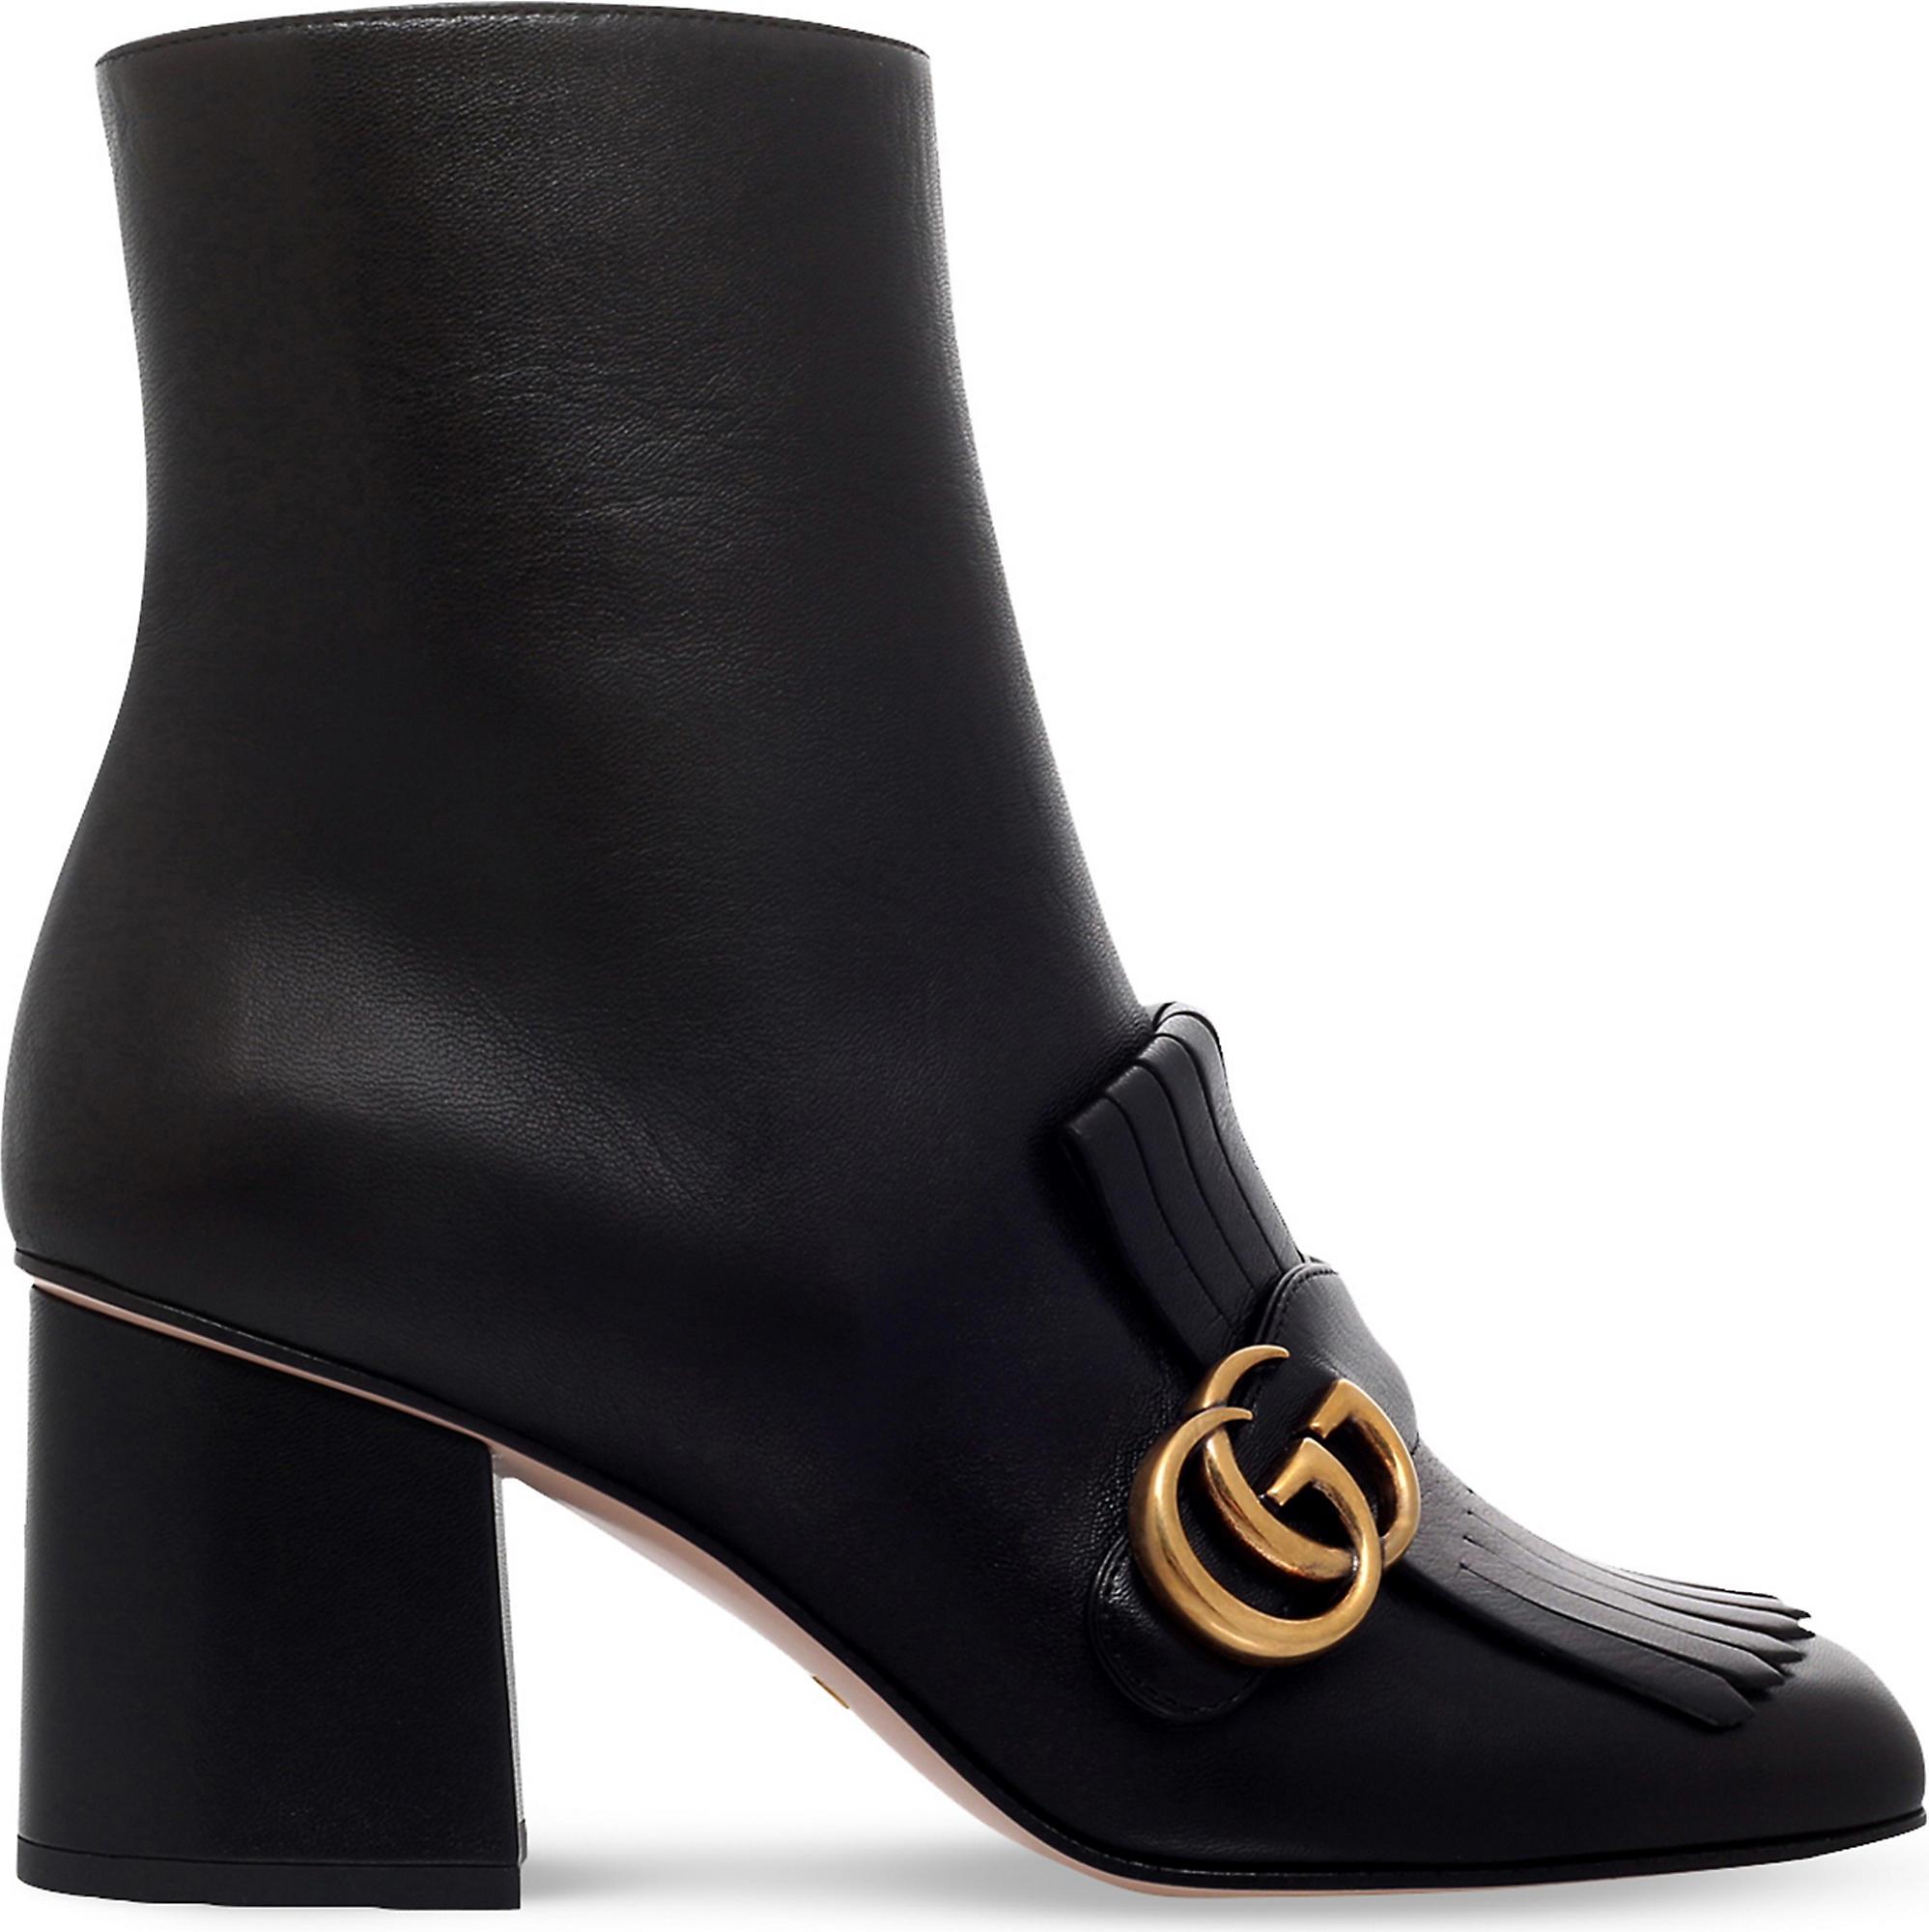 Gucci Marmont GG Suede Ankle Boots in Black - Save 65% - Lyst